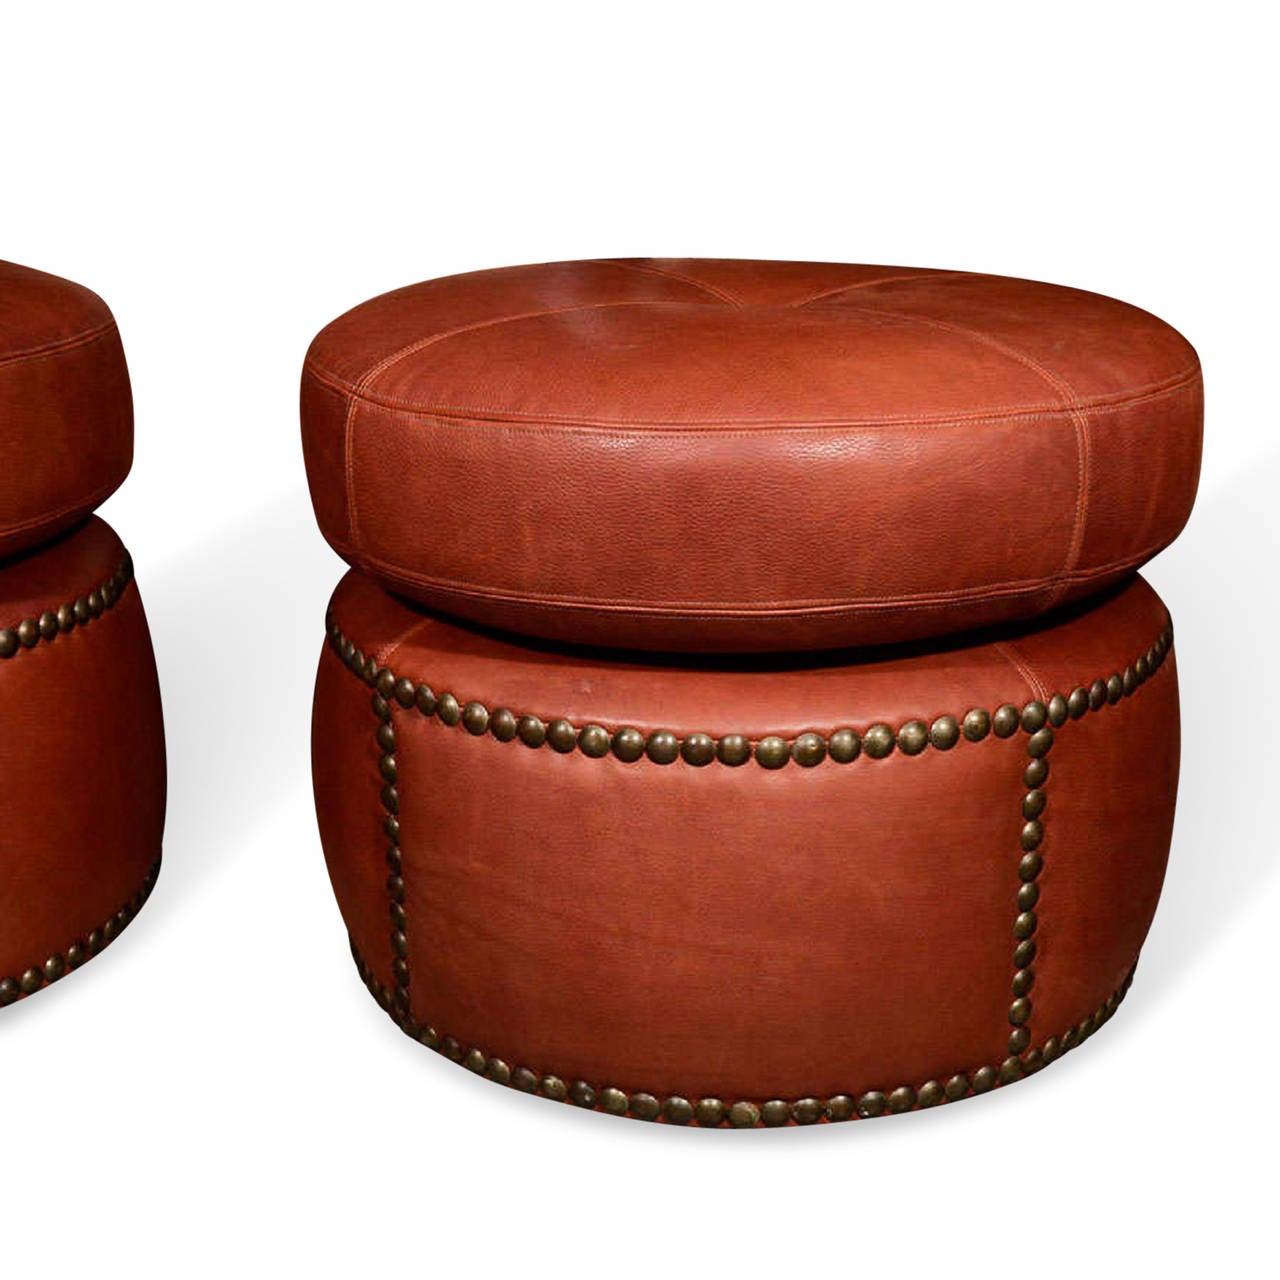 Pair of Leather Studded Poufs, French, 1920s For Sale 1